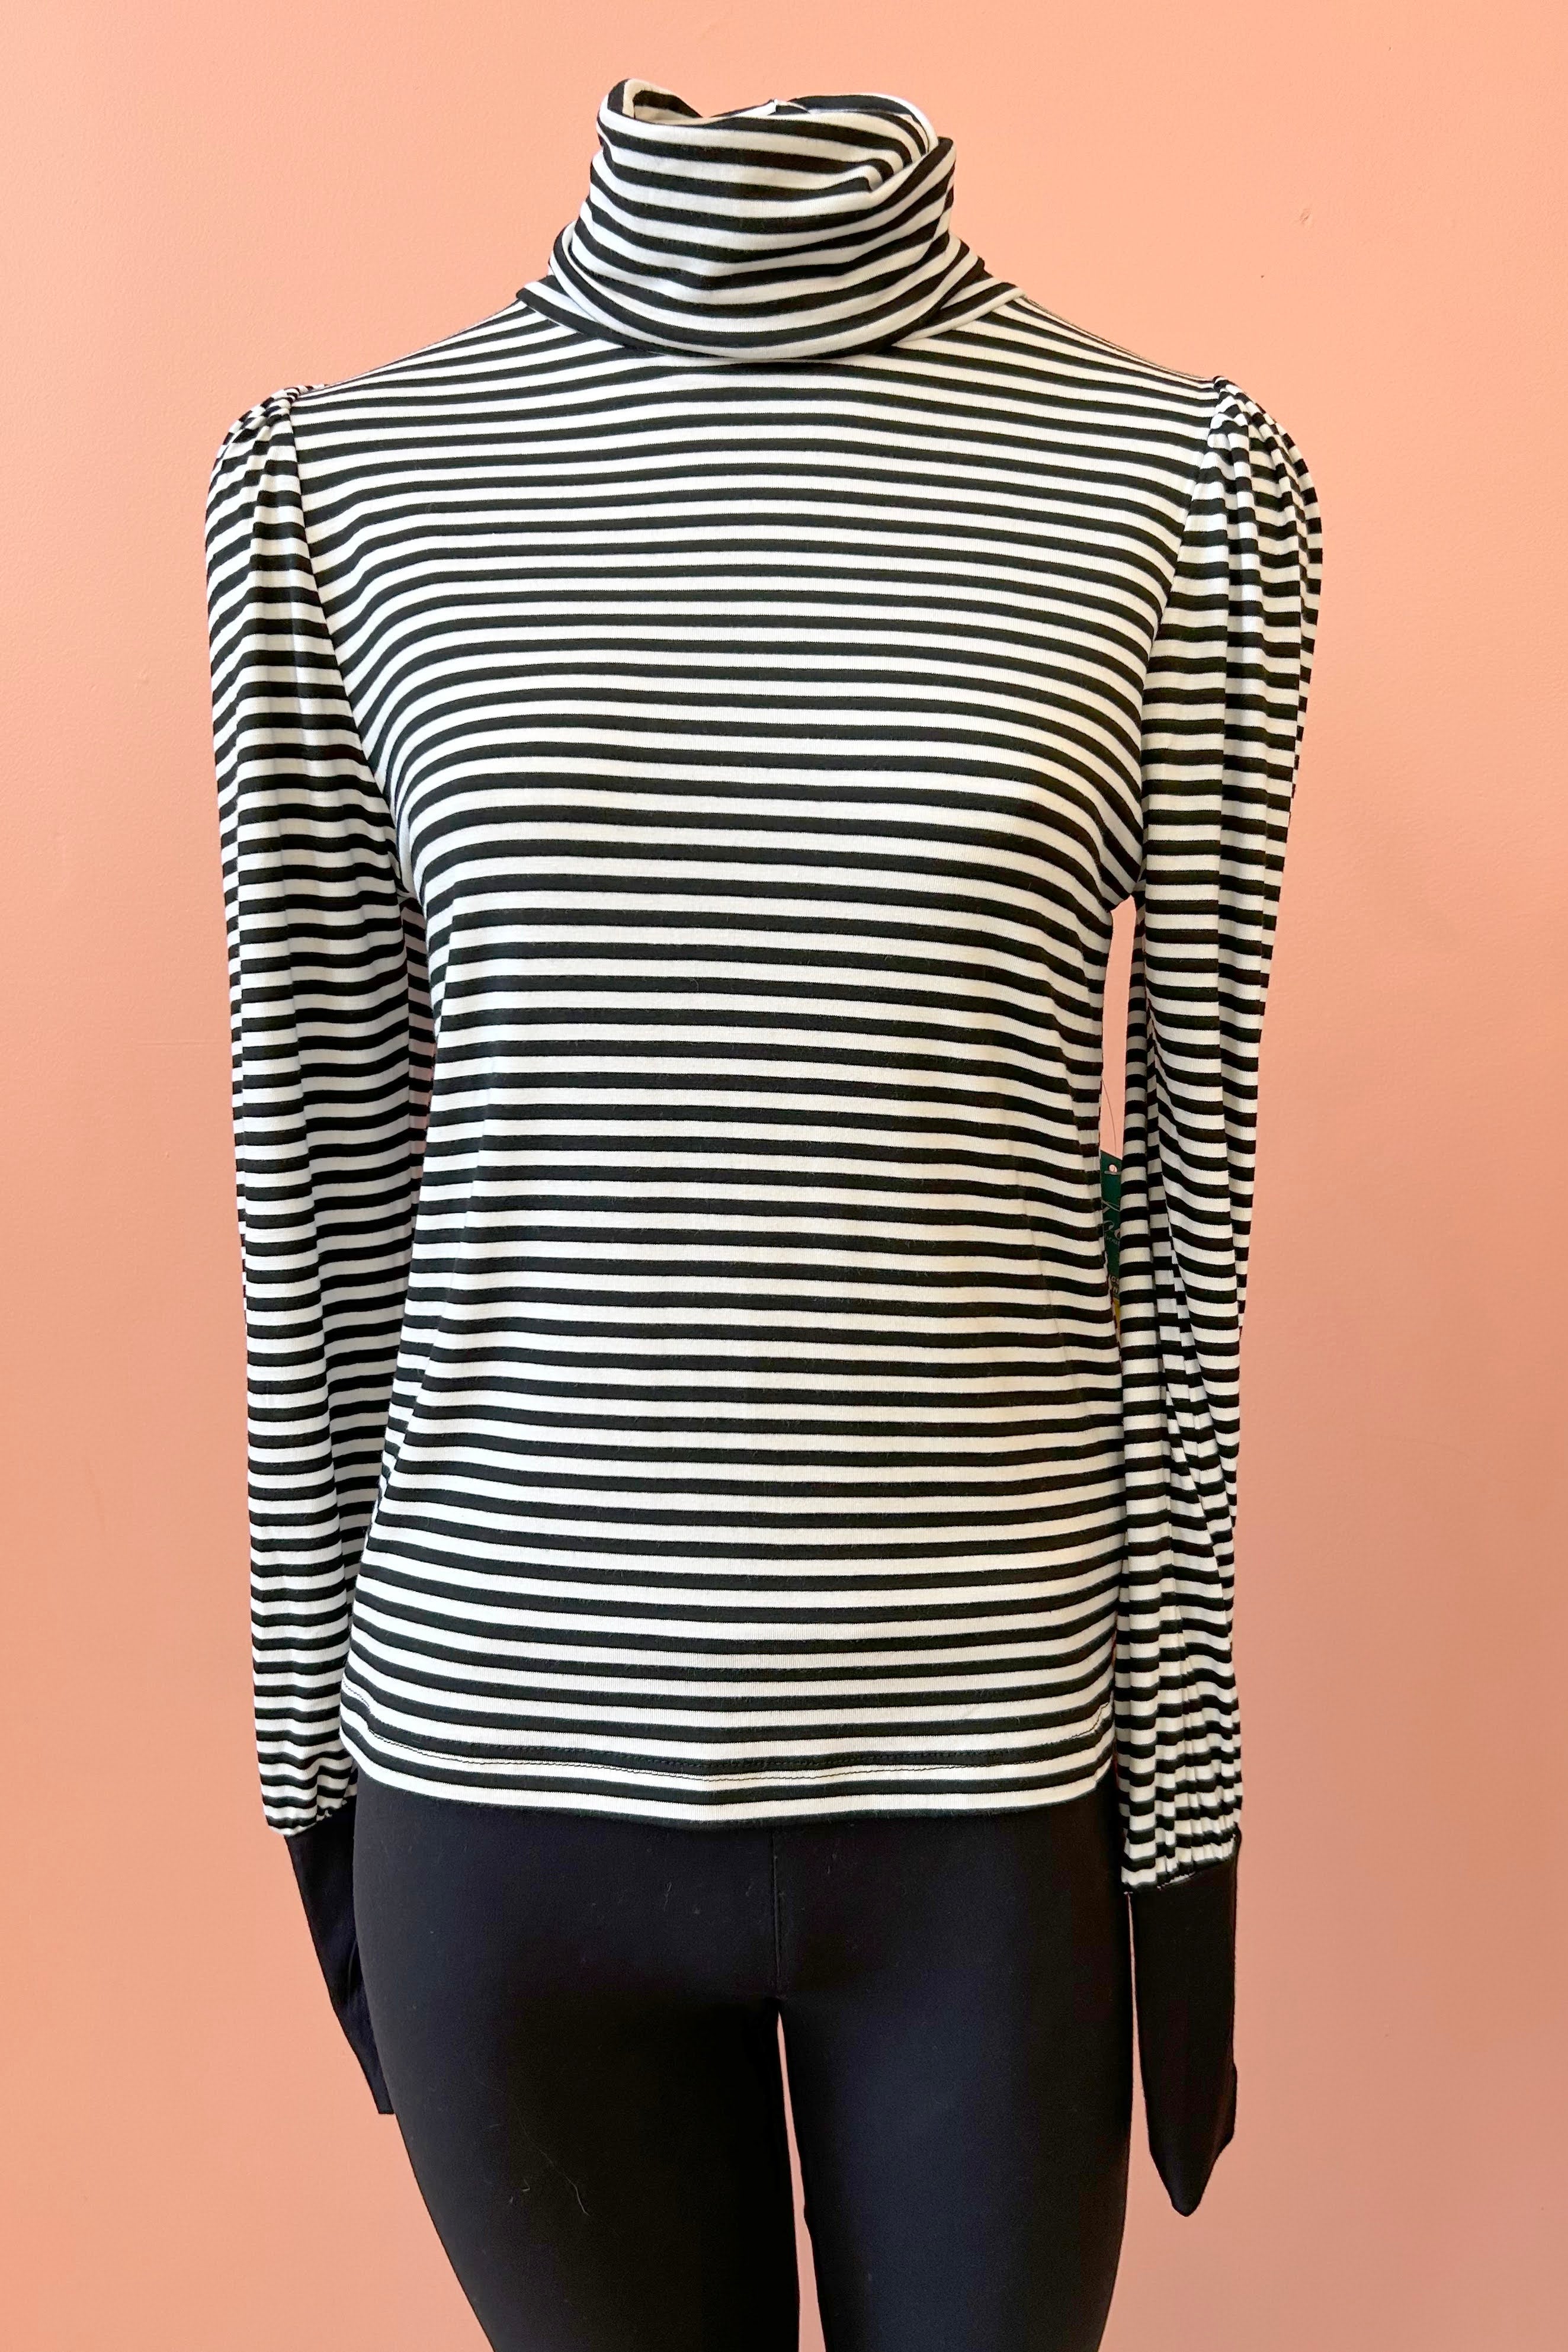 Turtleneck Top by Misstery, Black and White Stripe, high neck, puffed sleeves with gathered cuffs, sizes S to XL, made in Toronto 